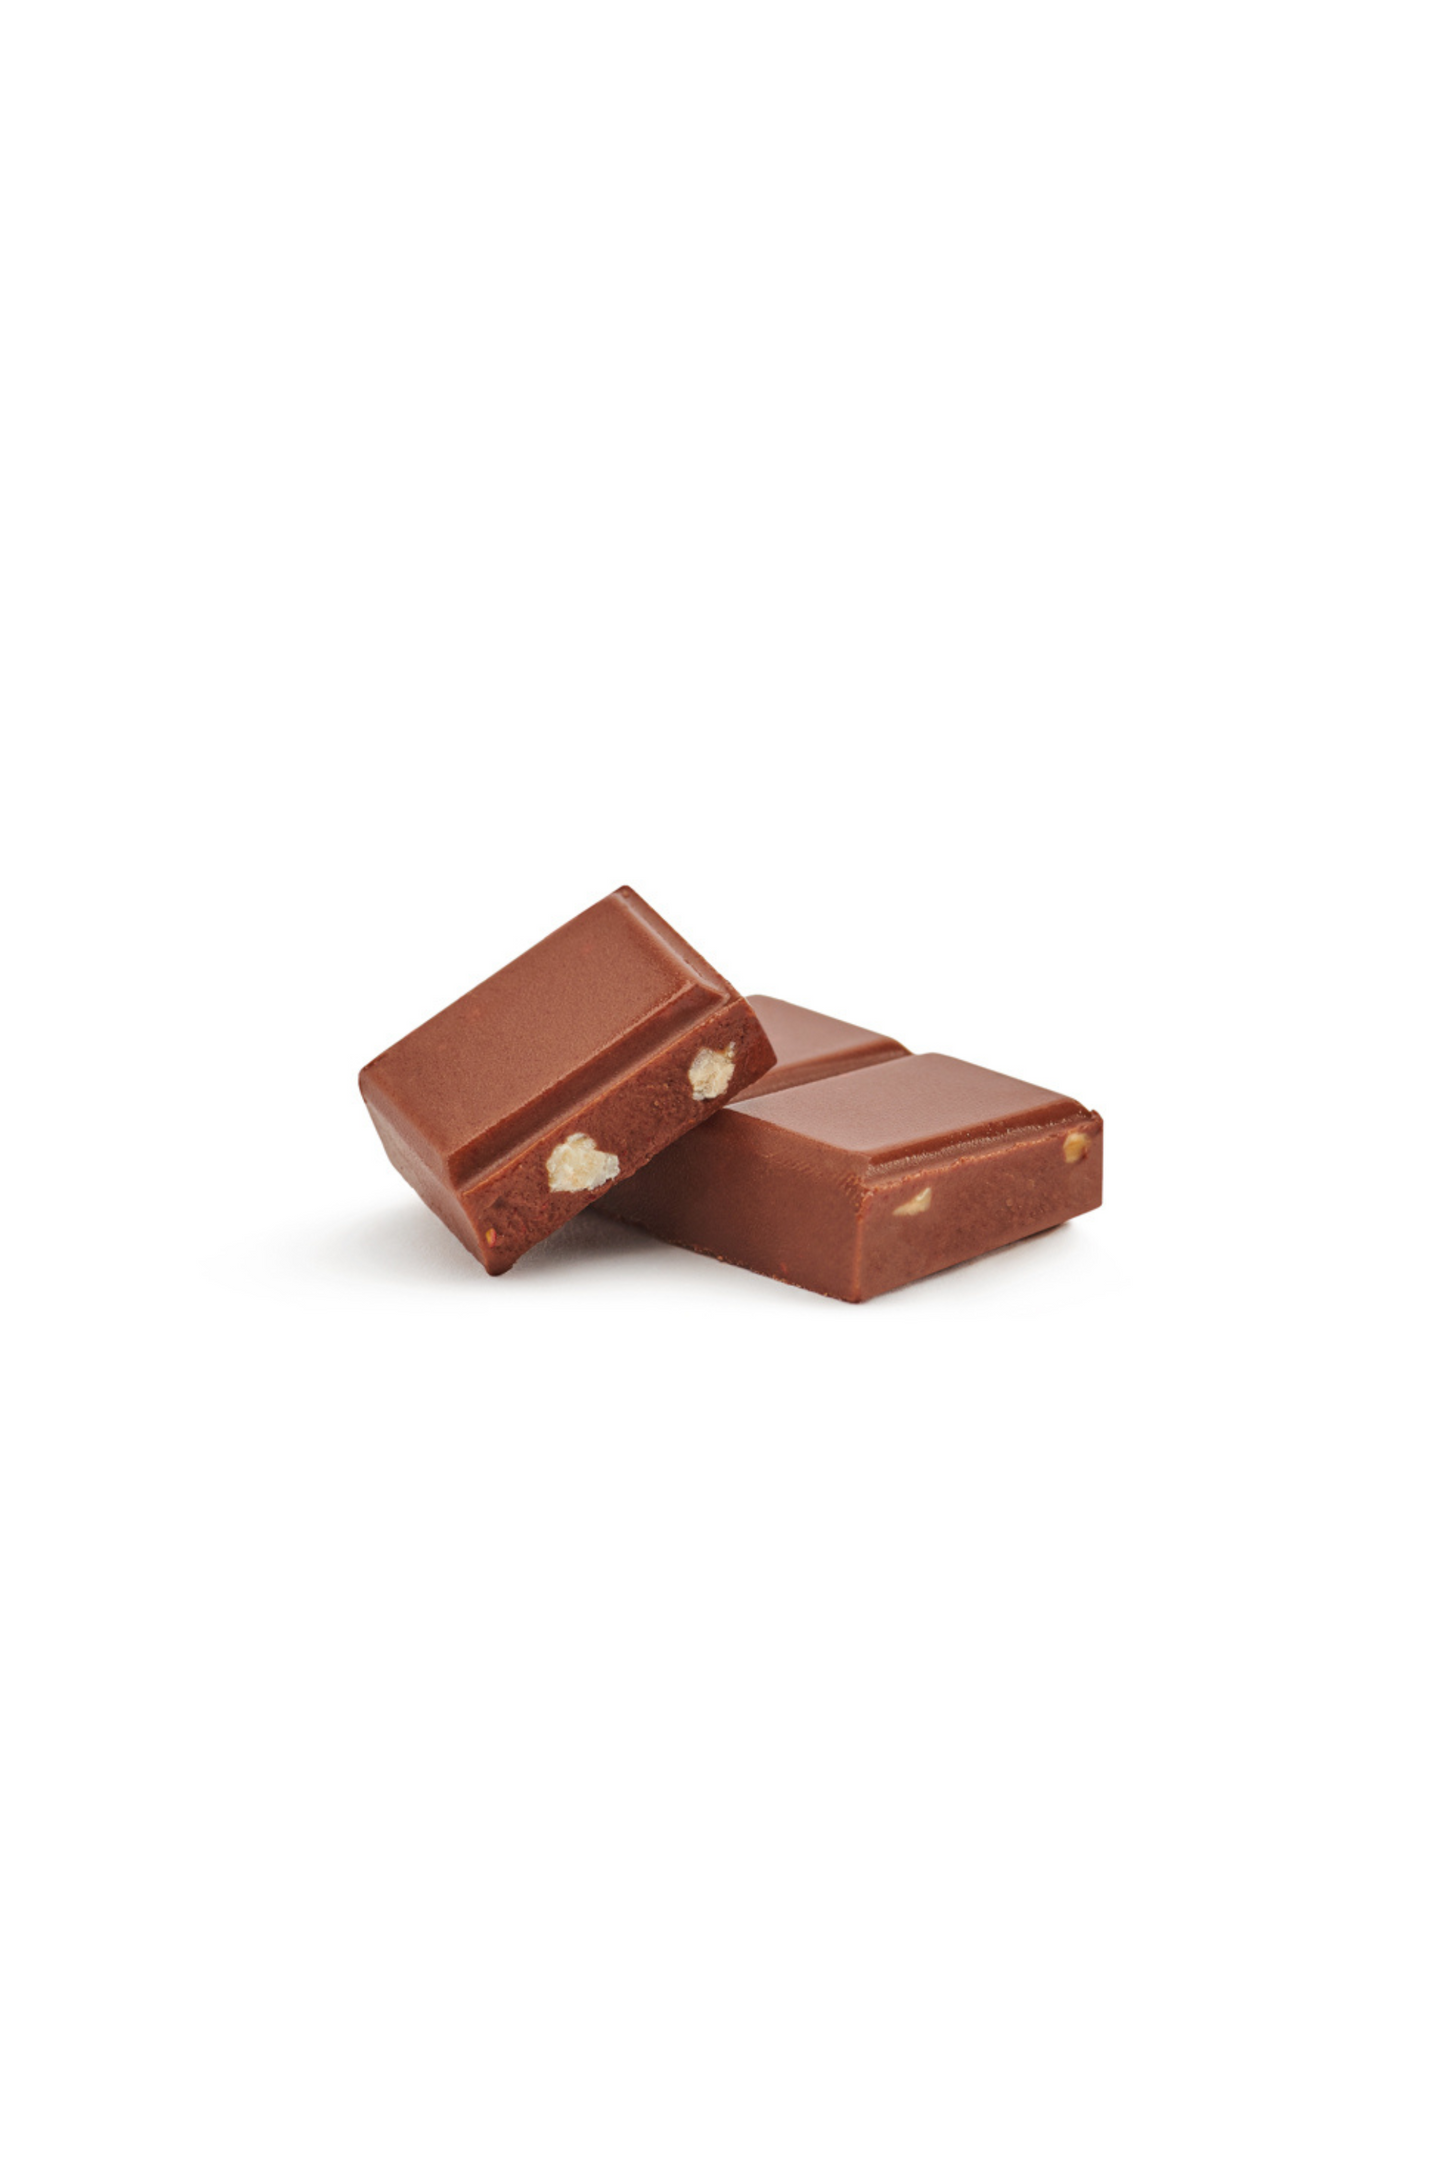 Bean -to-Bar. Strawberry & almond milk chocolate, with no added sugar. 43% cocoa content